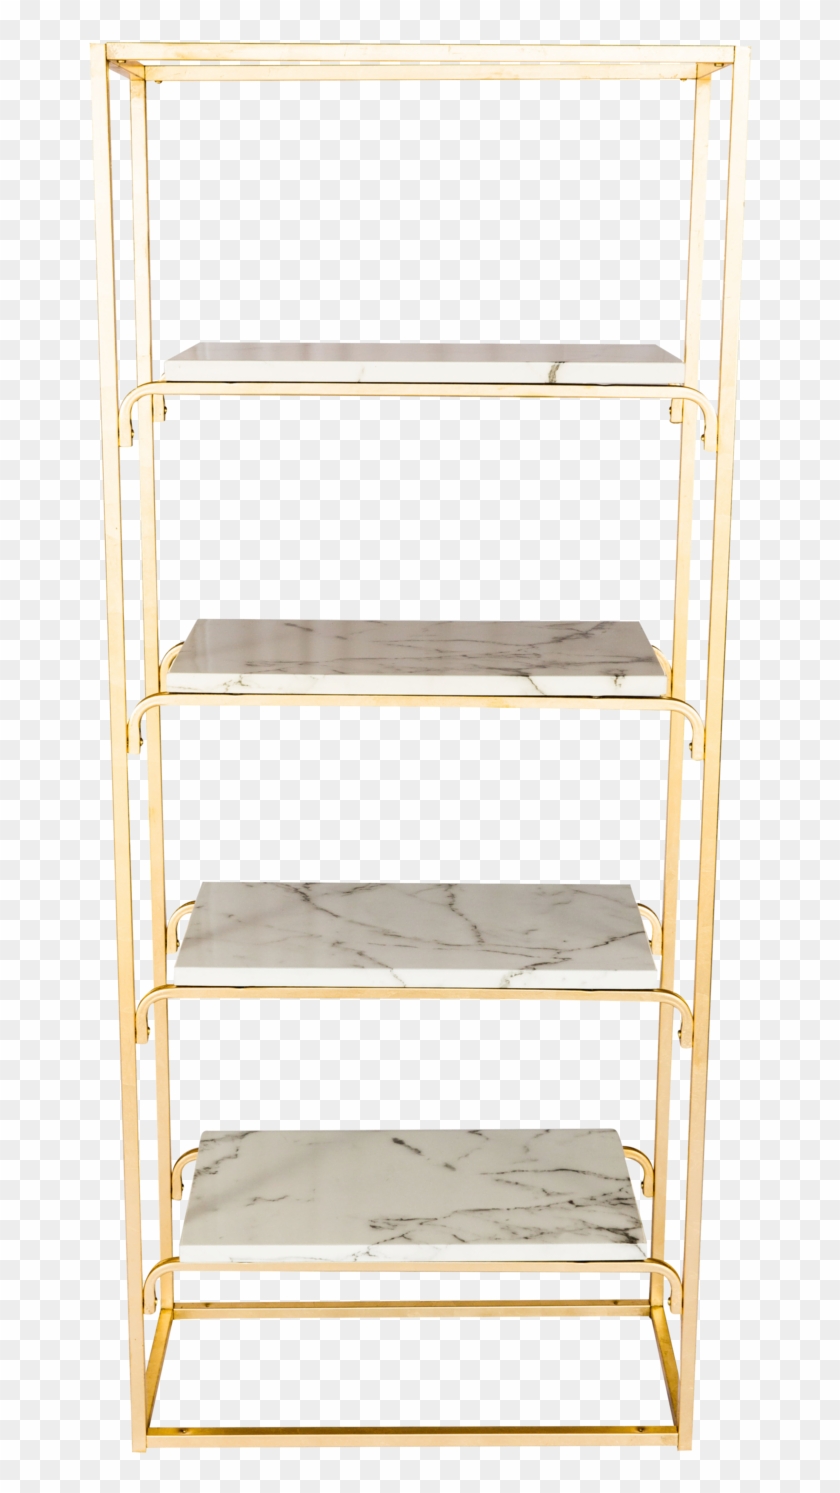 Gold And Marble Bookshelves Png Download Shelf Transparent Png 664x1413 Pngfind